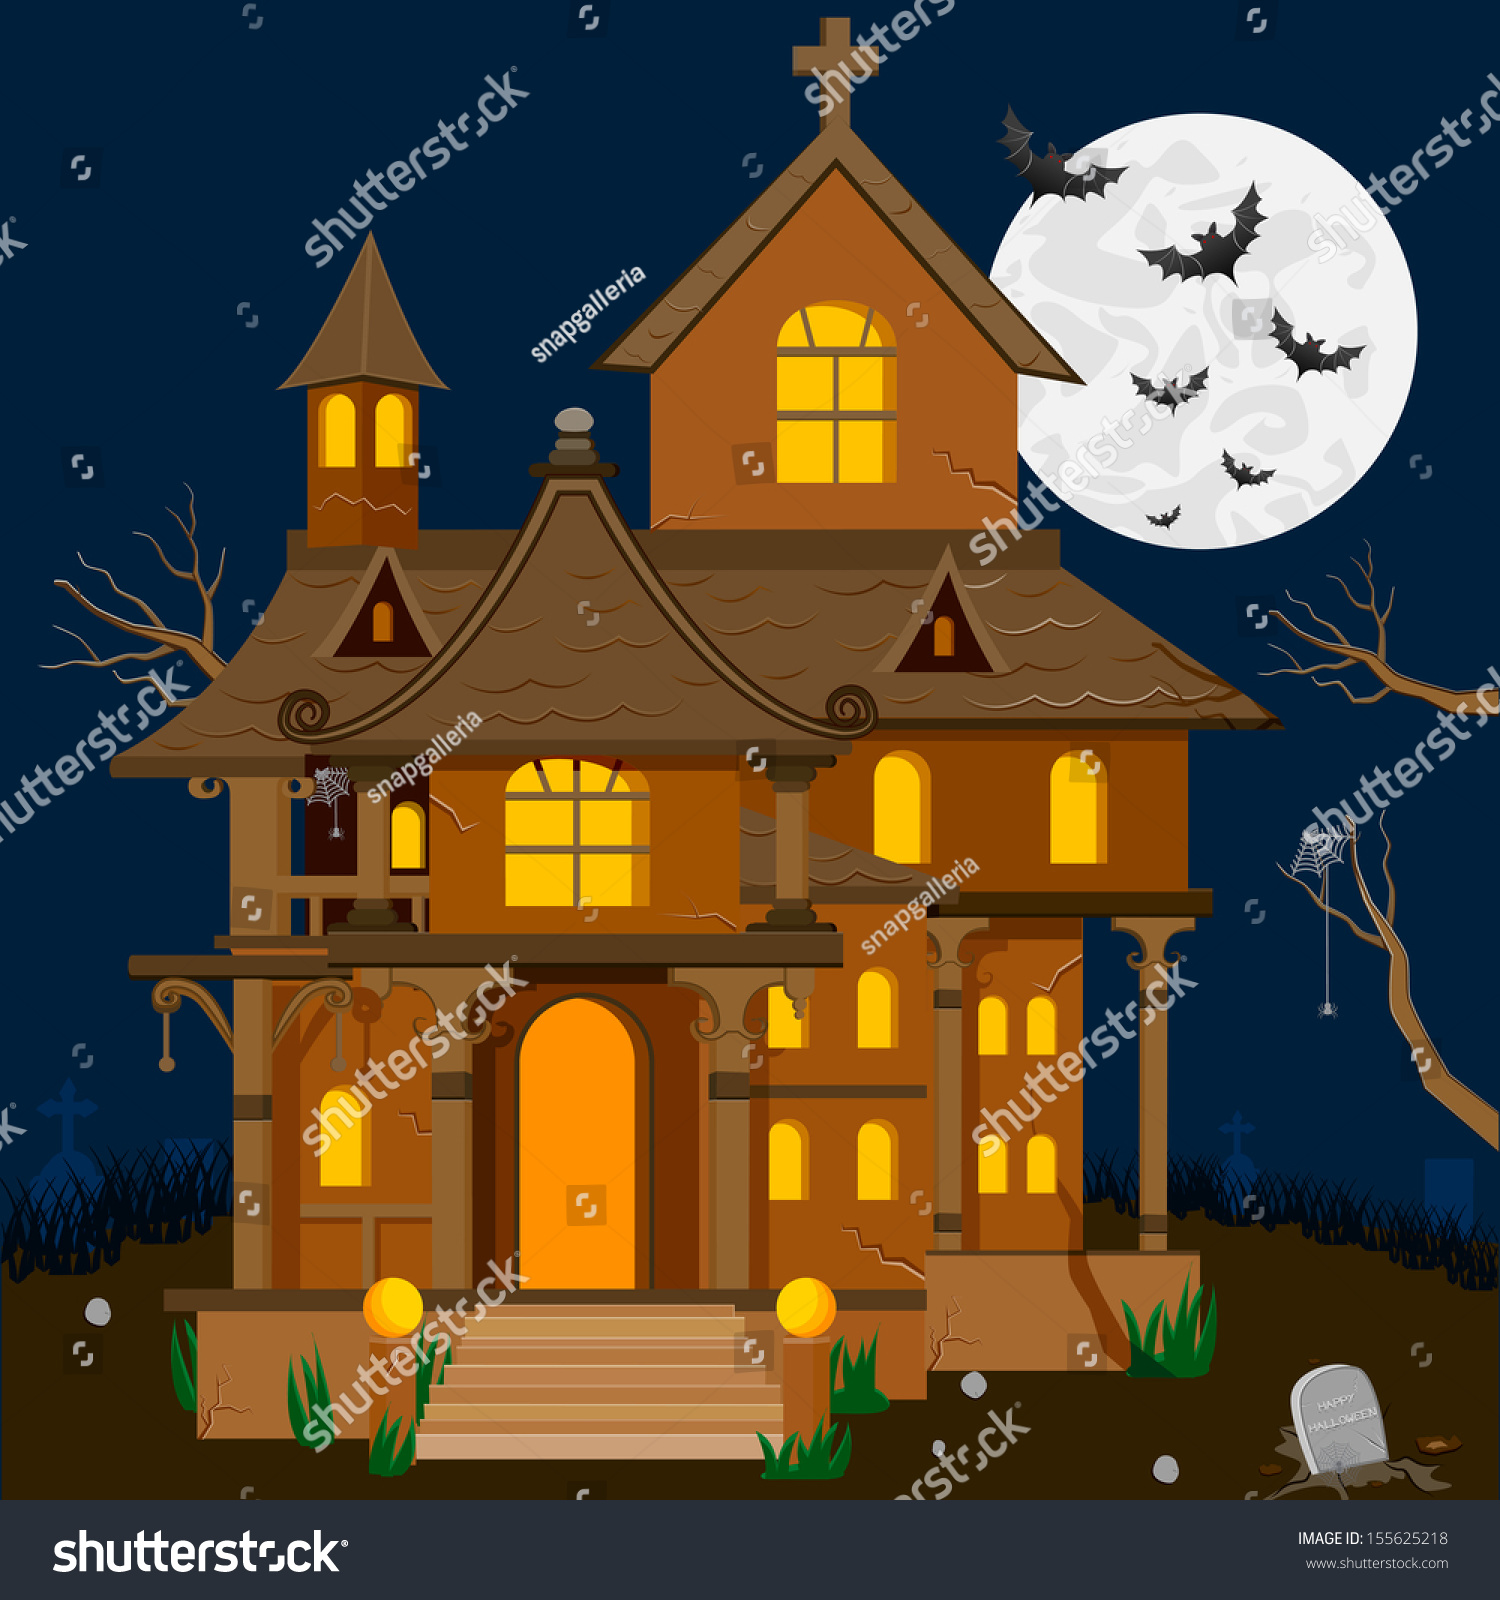 Easy Edit Vector Illustration Haunted House Stock Vector (Royalty Free ...